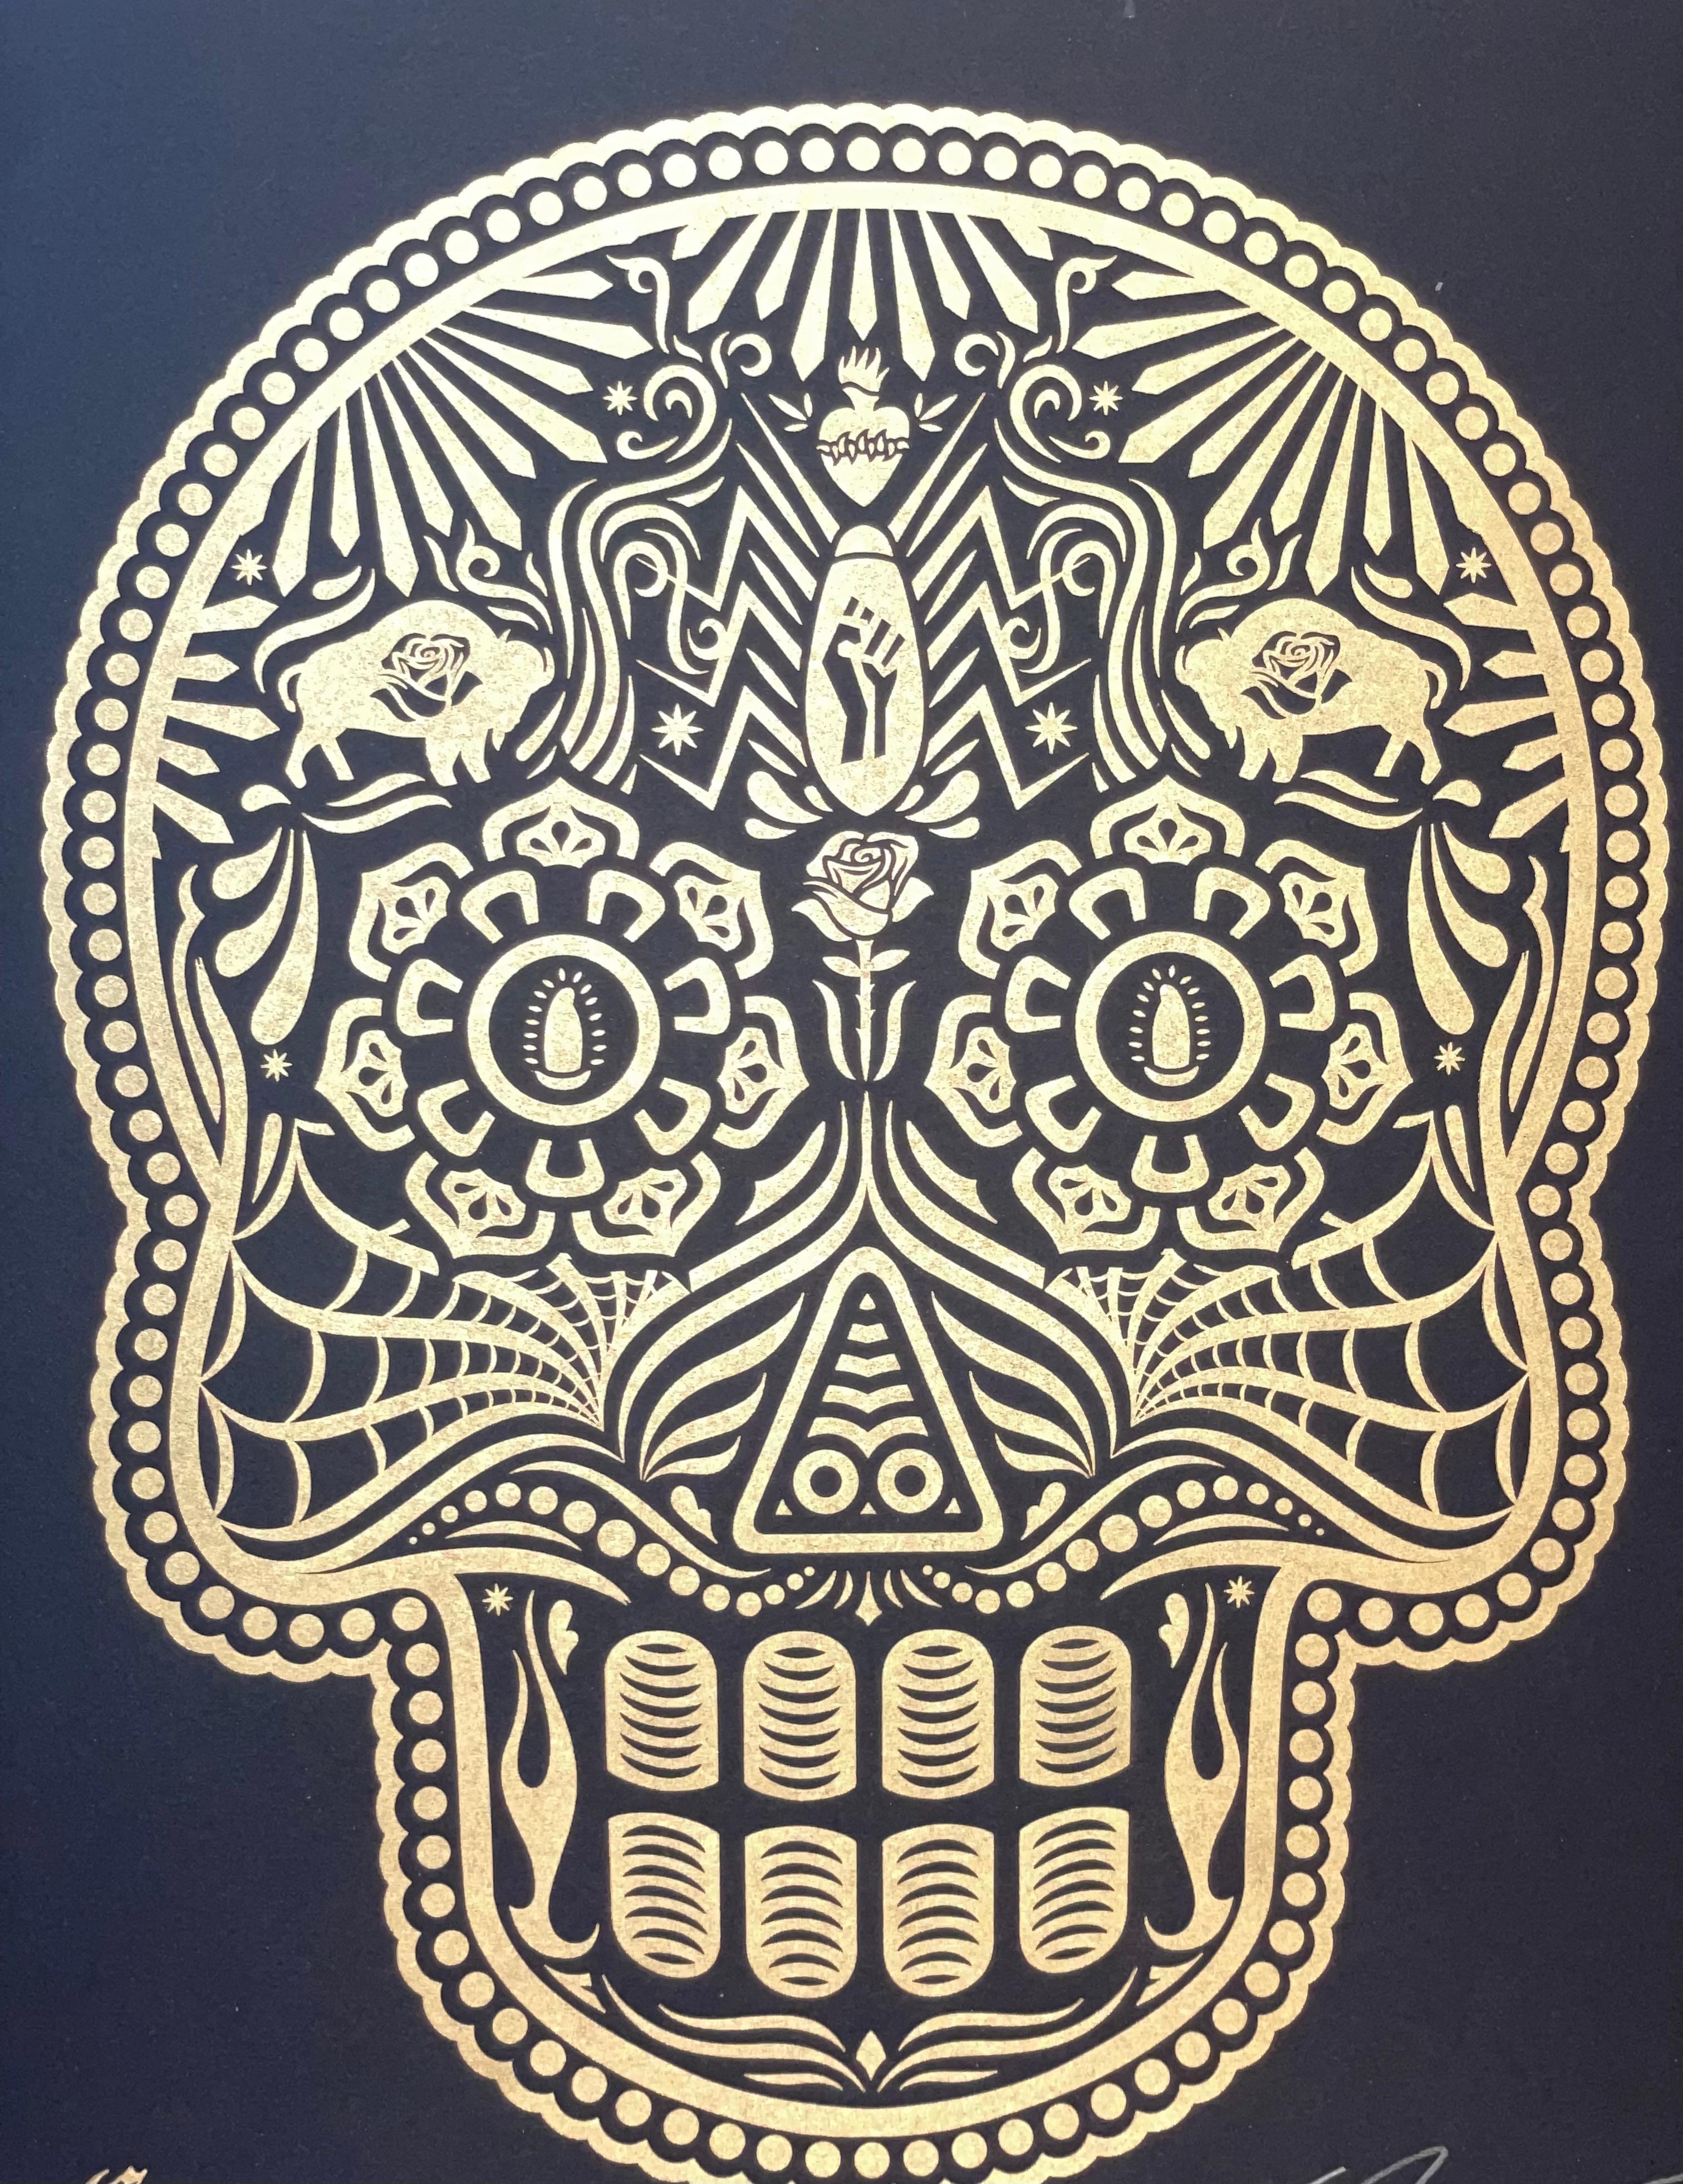 Obey & Ganas Day of the Dead Calavera Set. 11 x 14 inches. Letterpress print by Aardvark Letterpress. Obey version Signed by Ernesto Yerena and Shepard Fairey. Ganas version signed by Ernesto Yerena. Edition of 250. Sold as matching numbered